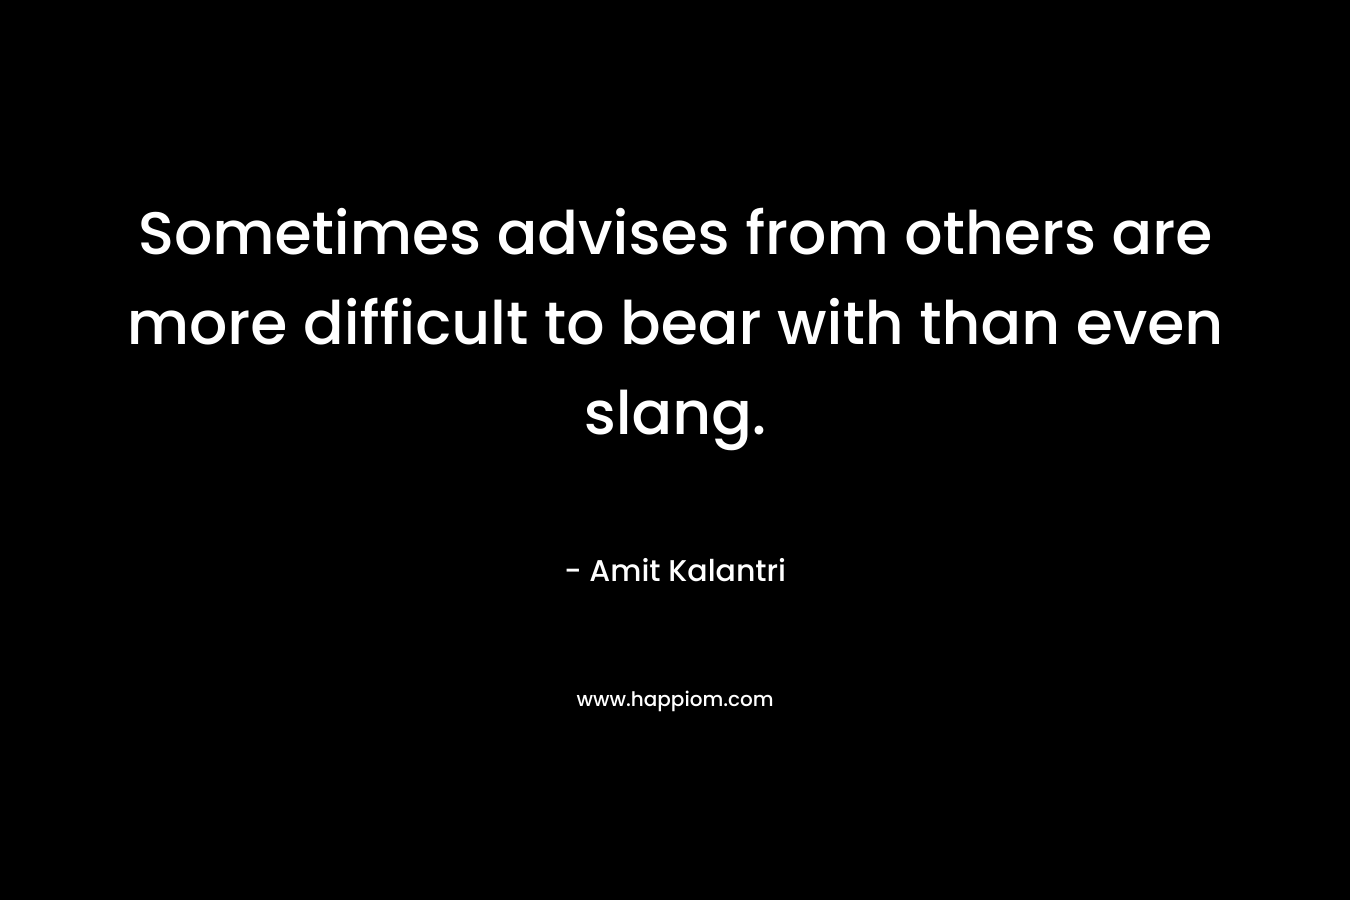 Sometimes advises from others are more difficult to bear with than even slang.